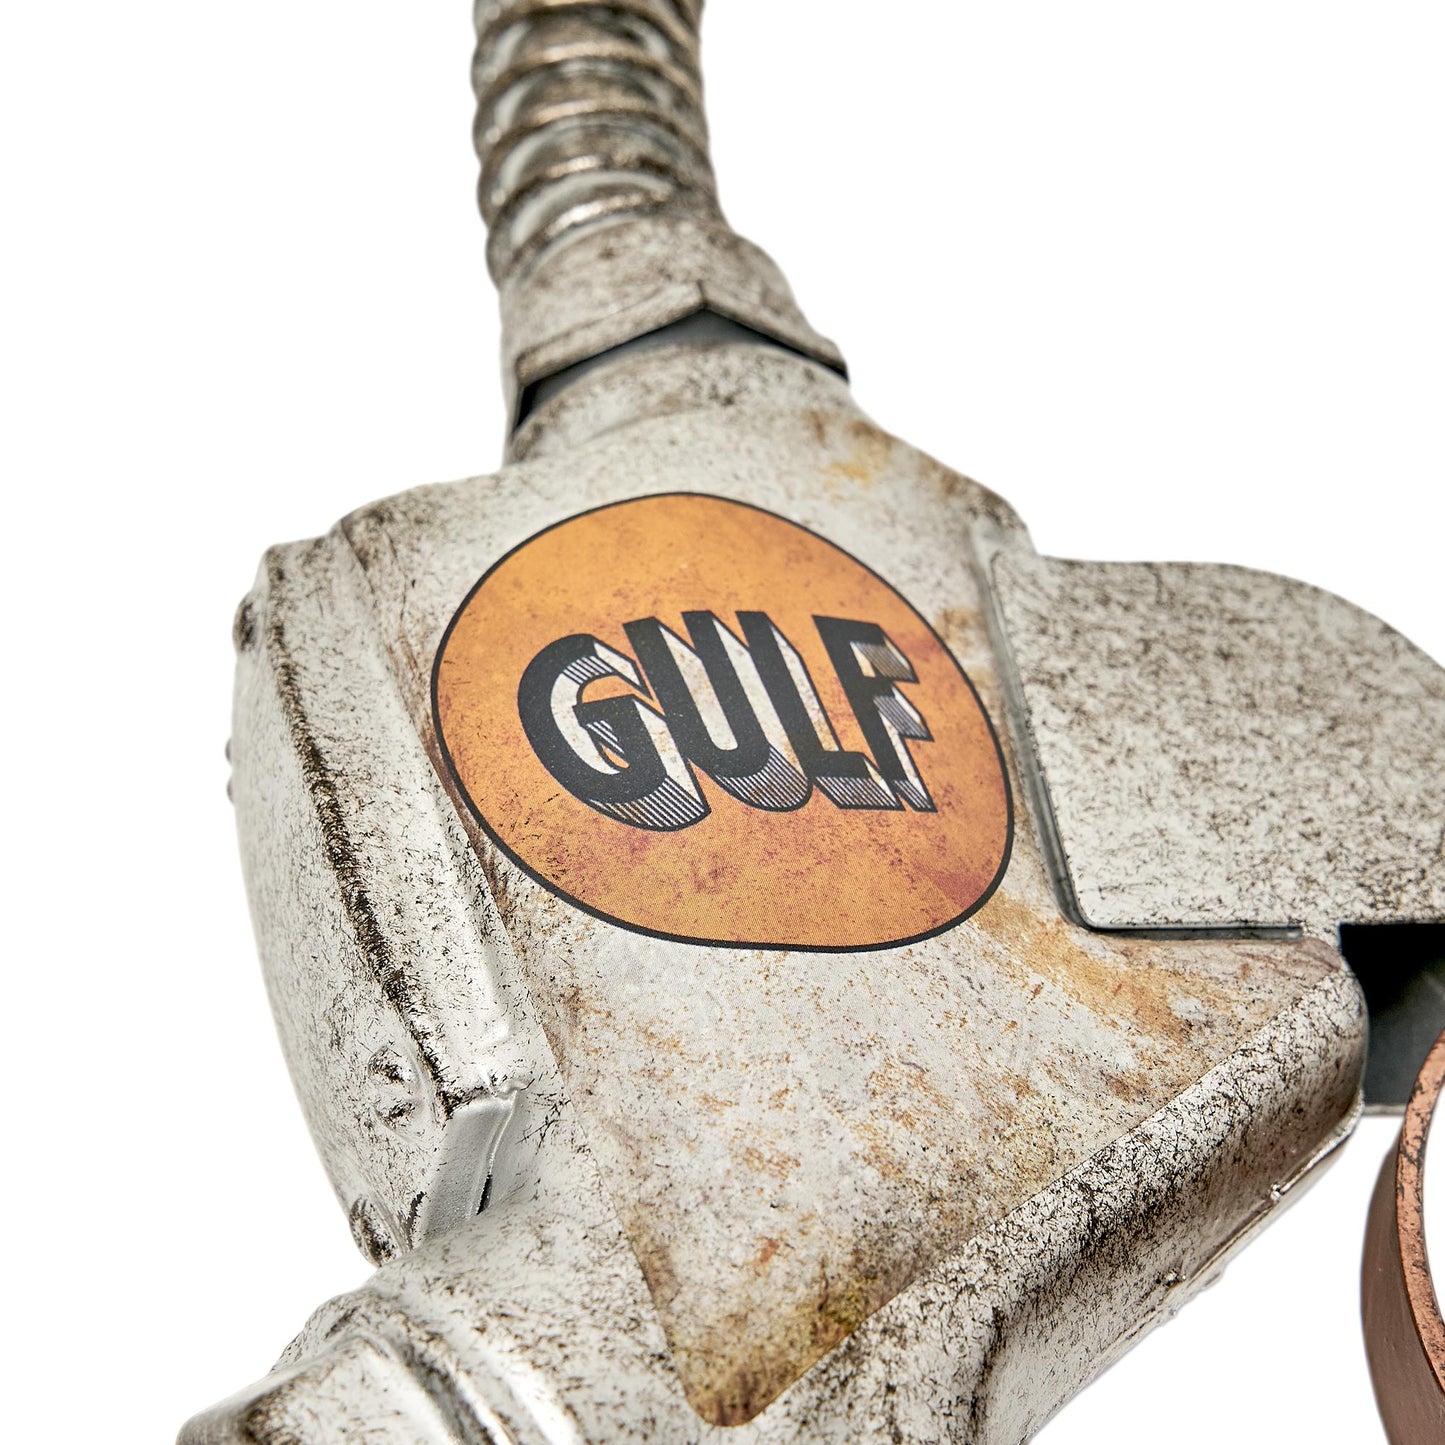 Gulf Metal Gas Nozzle Wall Decor Sign 5.75" x 14.5"